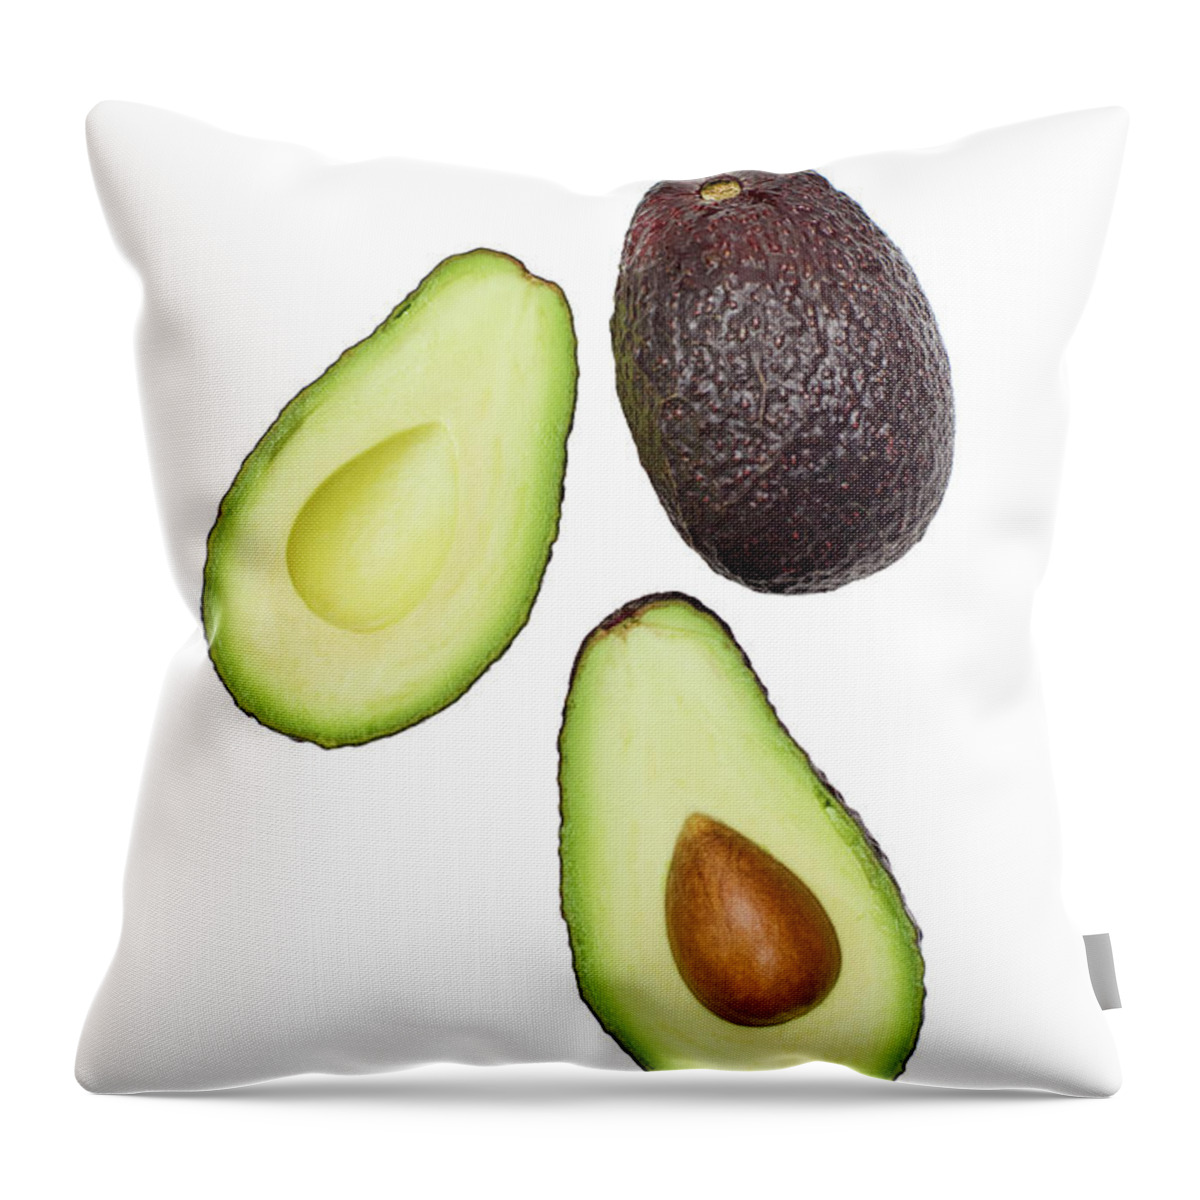 White Background Throw Pillow featuring the photograph Studio Shot Of Avocado by Johner Images